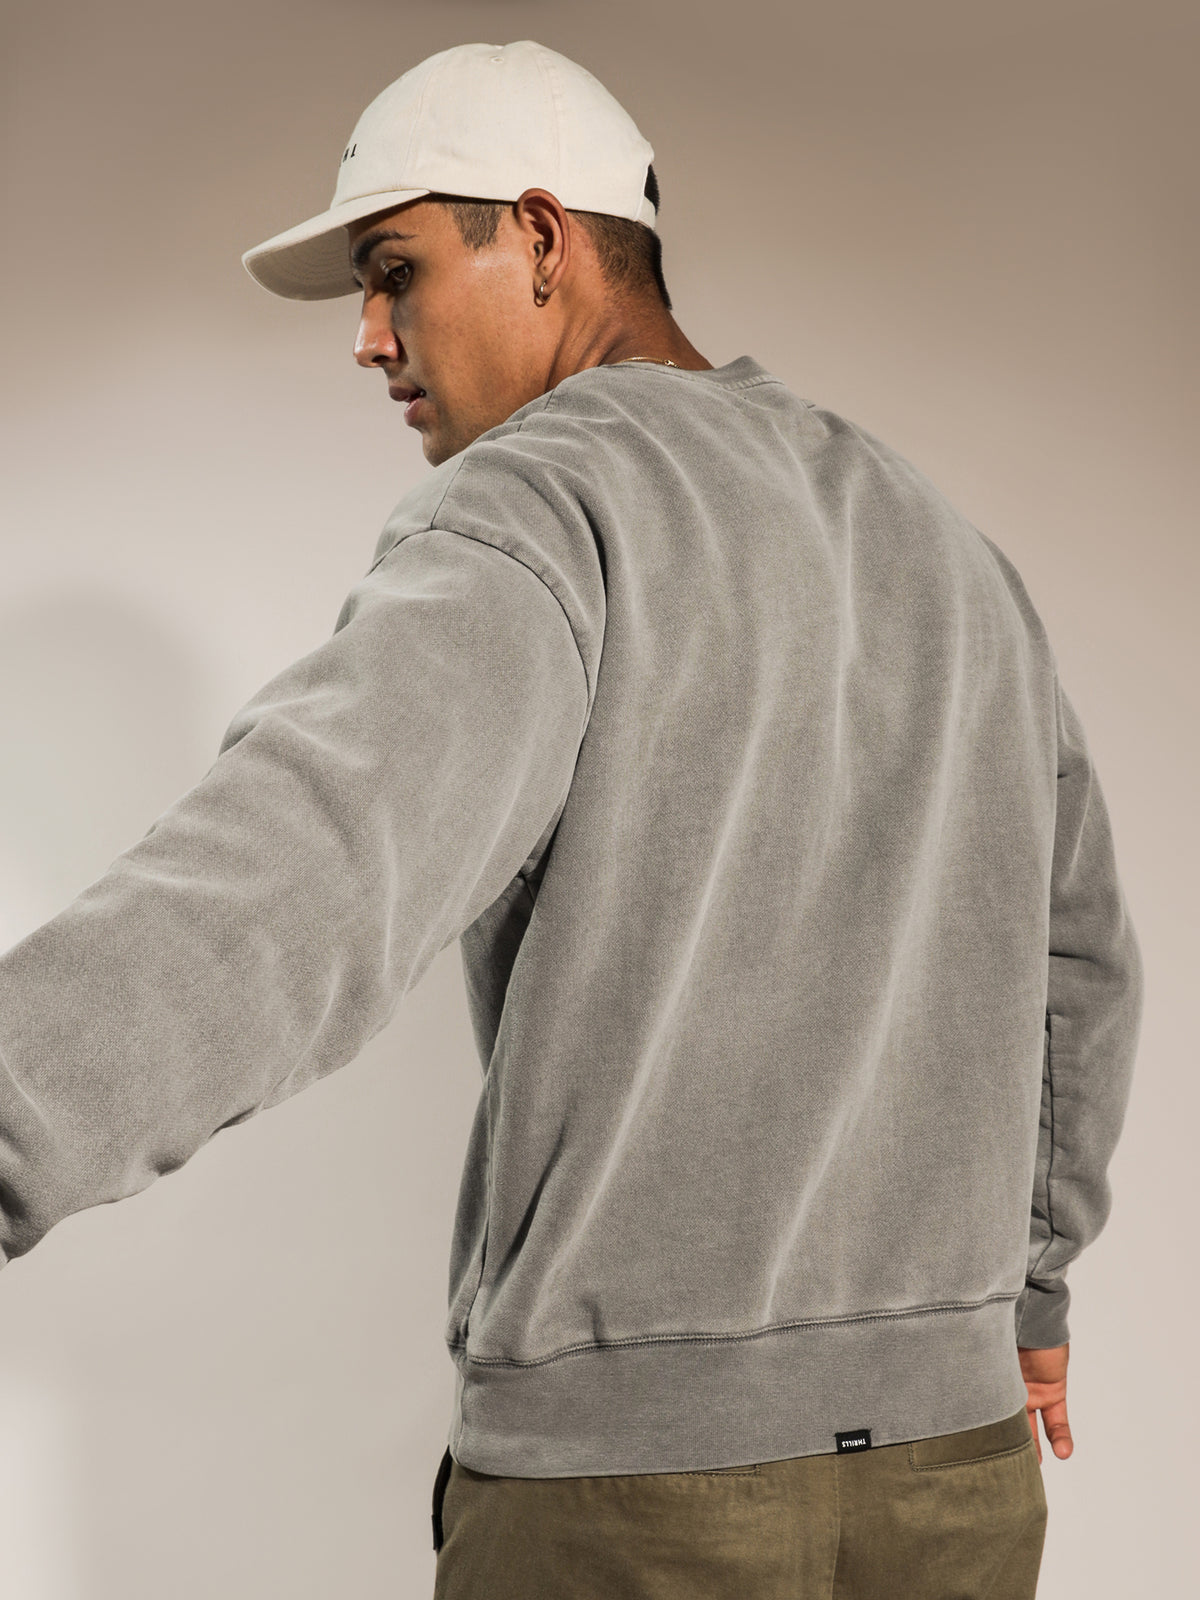 Storm The Castle Crewneck in Washed Grey